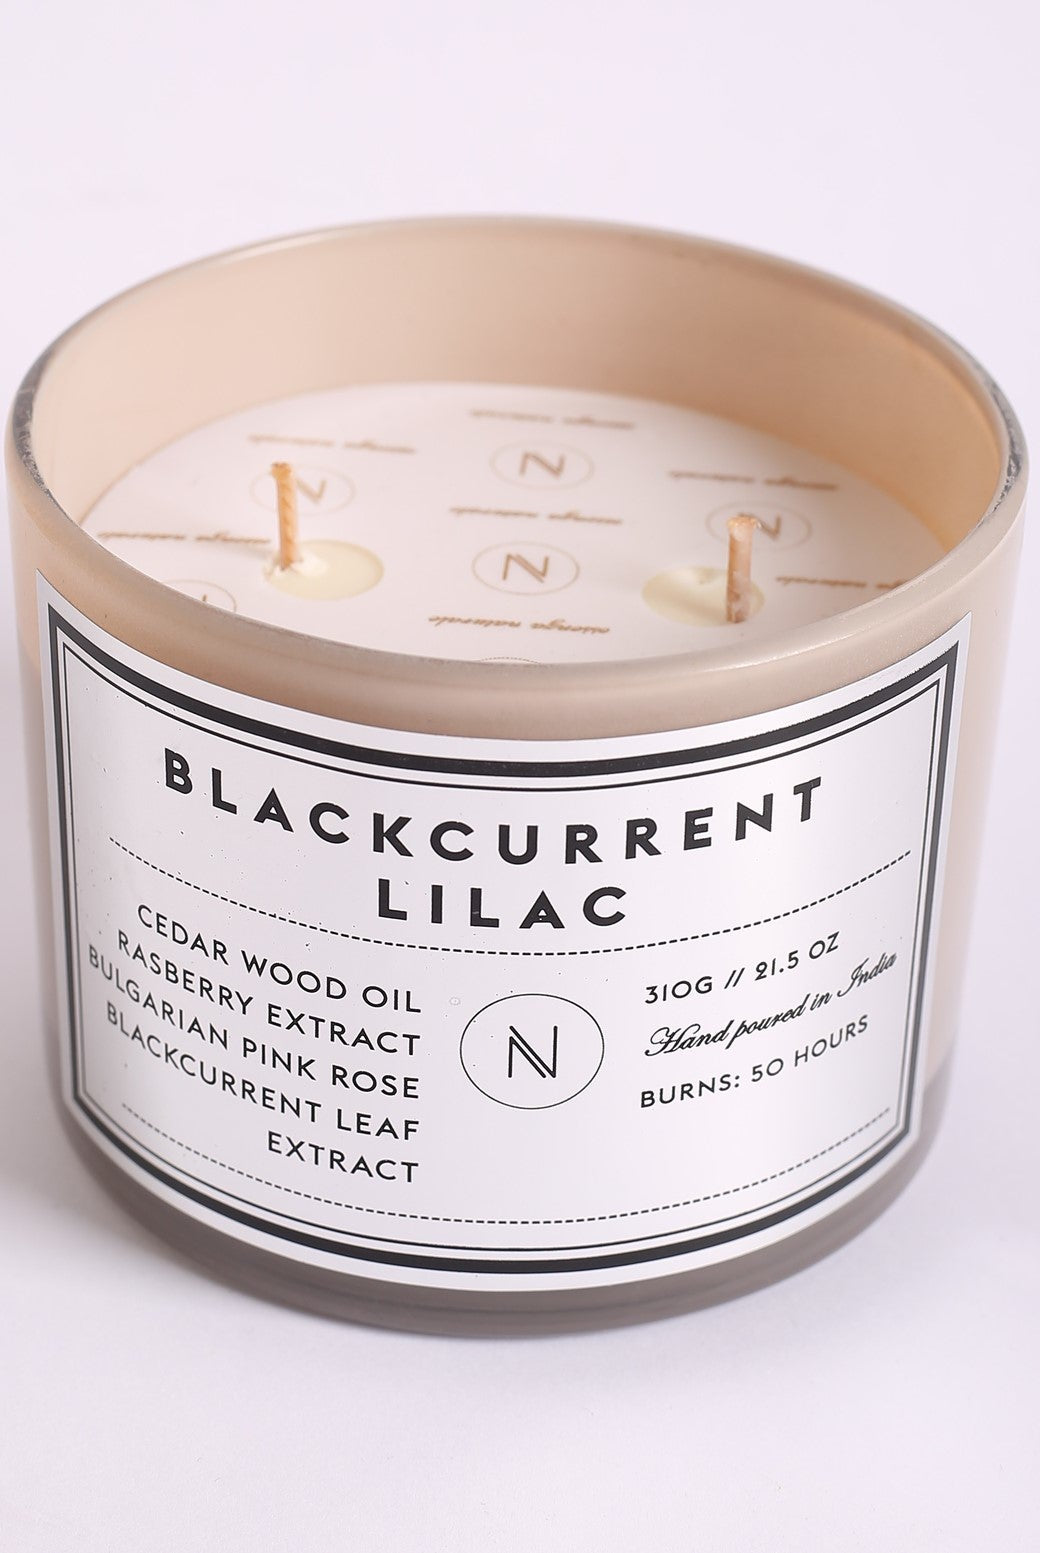 Blackcurrant infused in Lilac Candle - CiceroniNASO